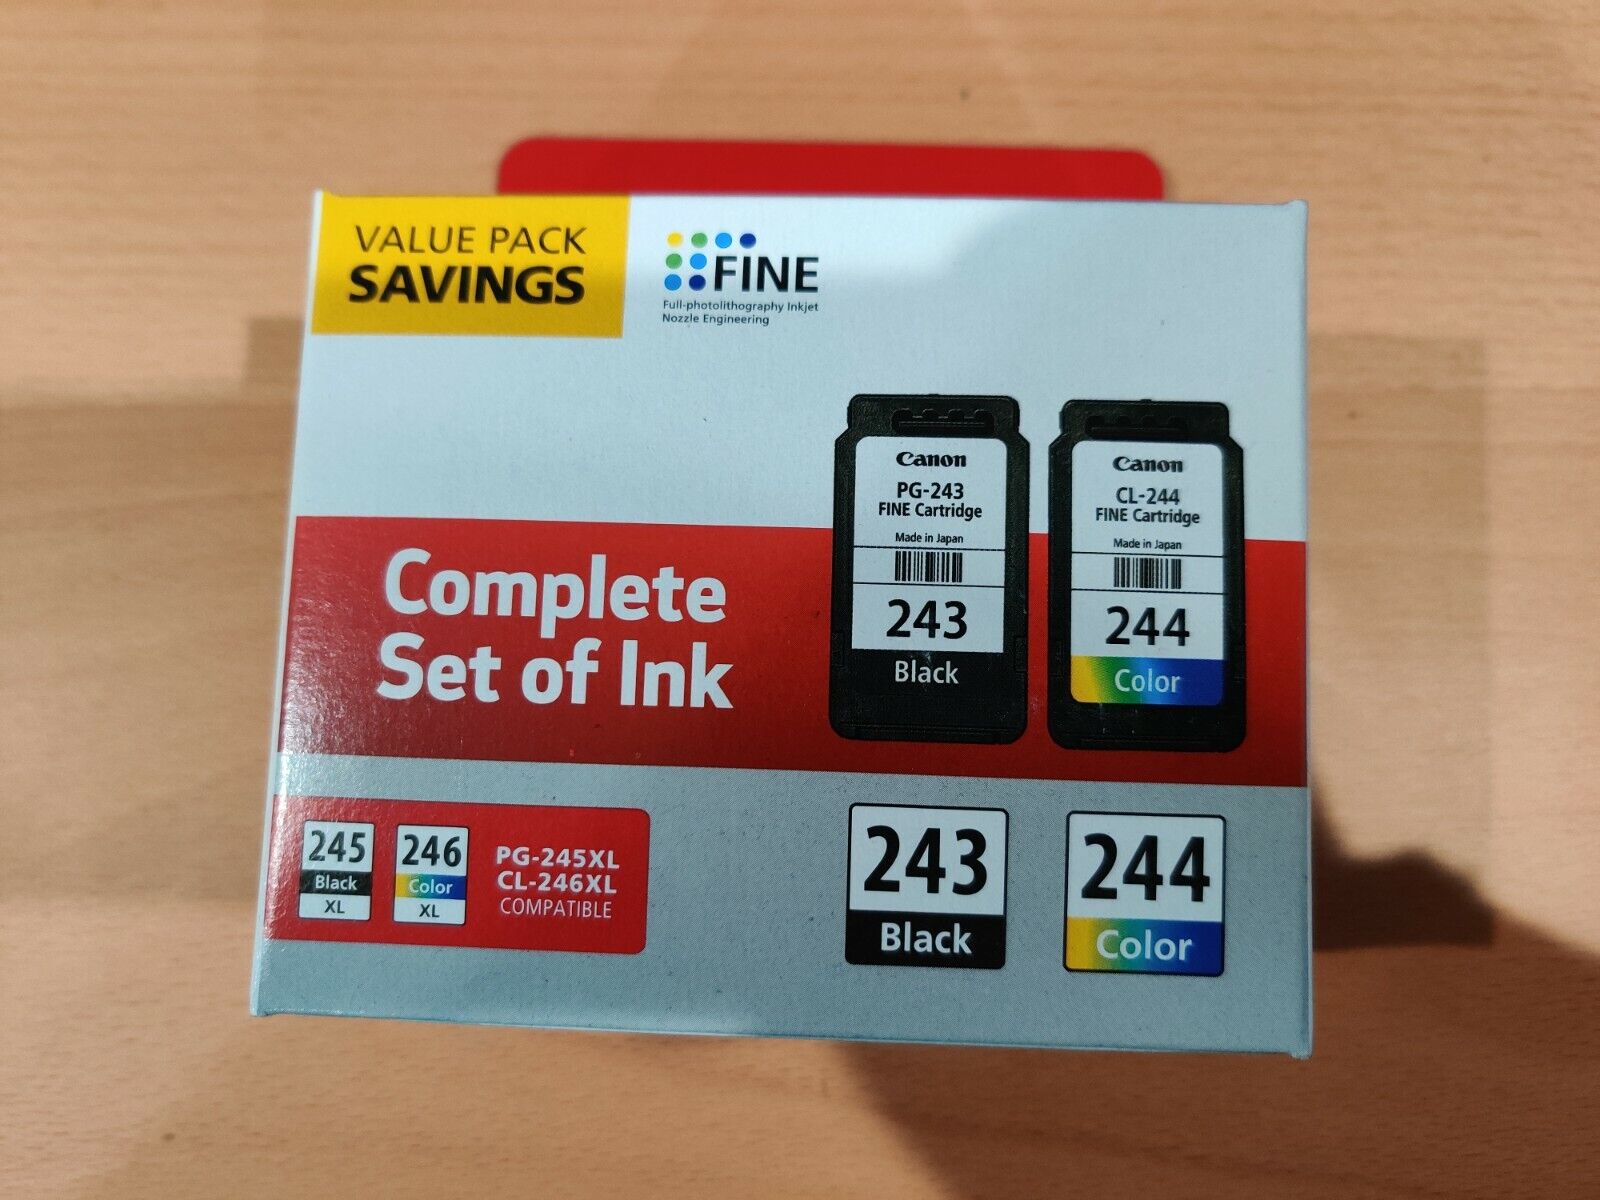 Genuine New Canon PG-243 CL-244 Ink Cartridge Black/Color Combo Value Pack